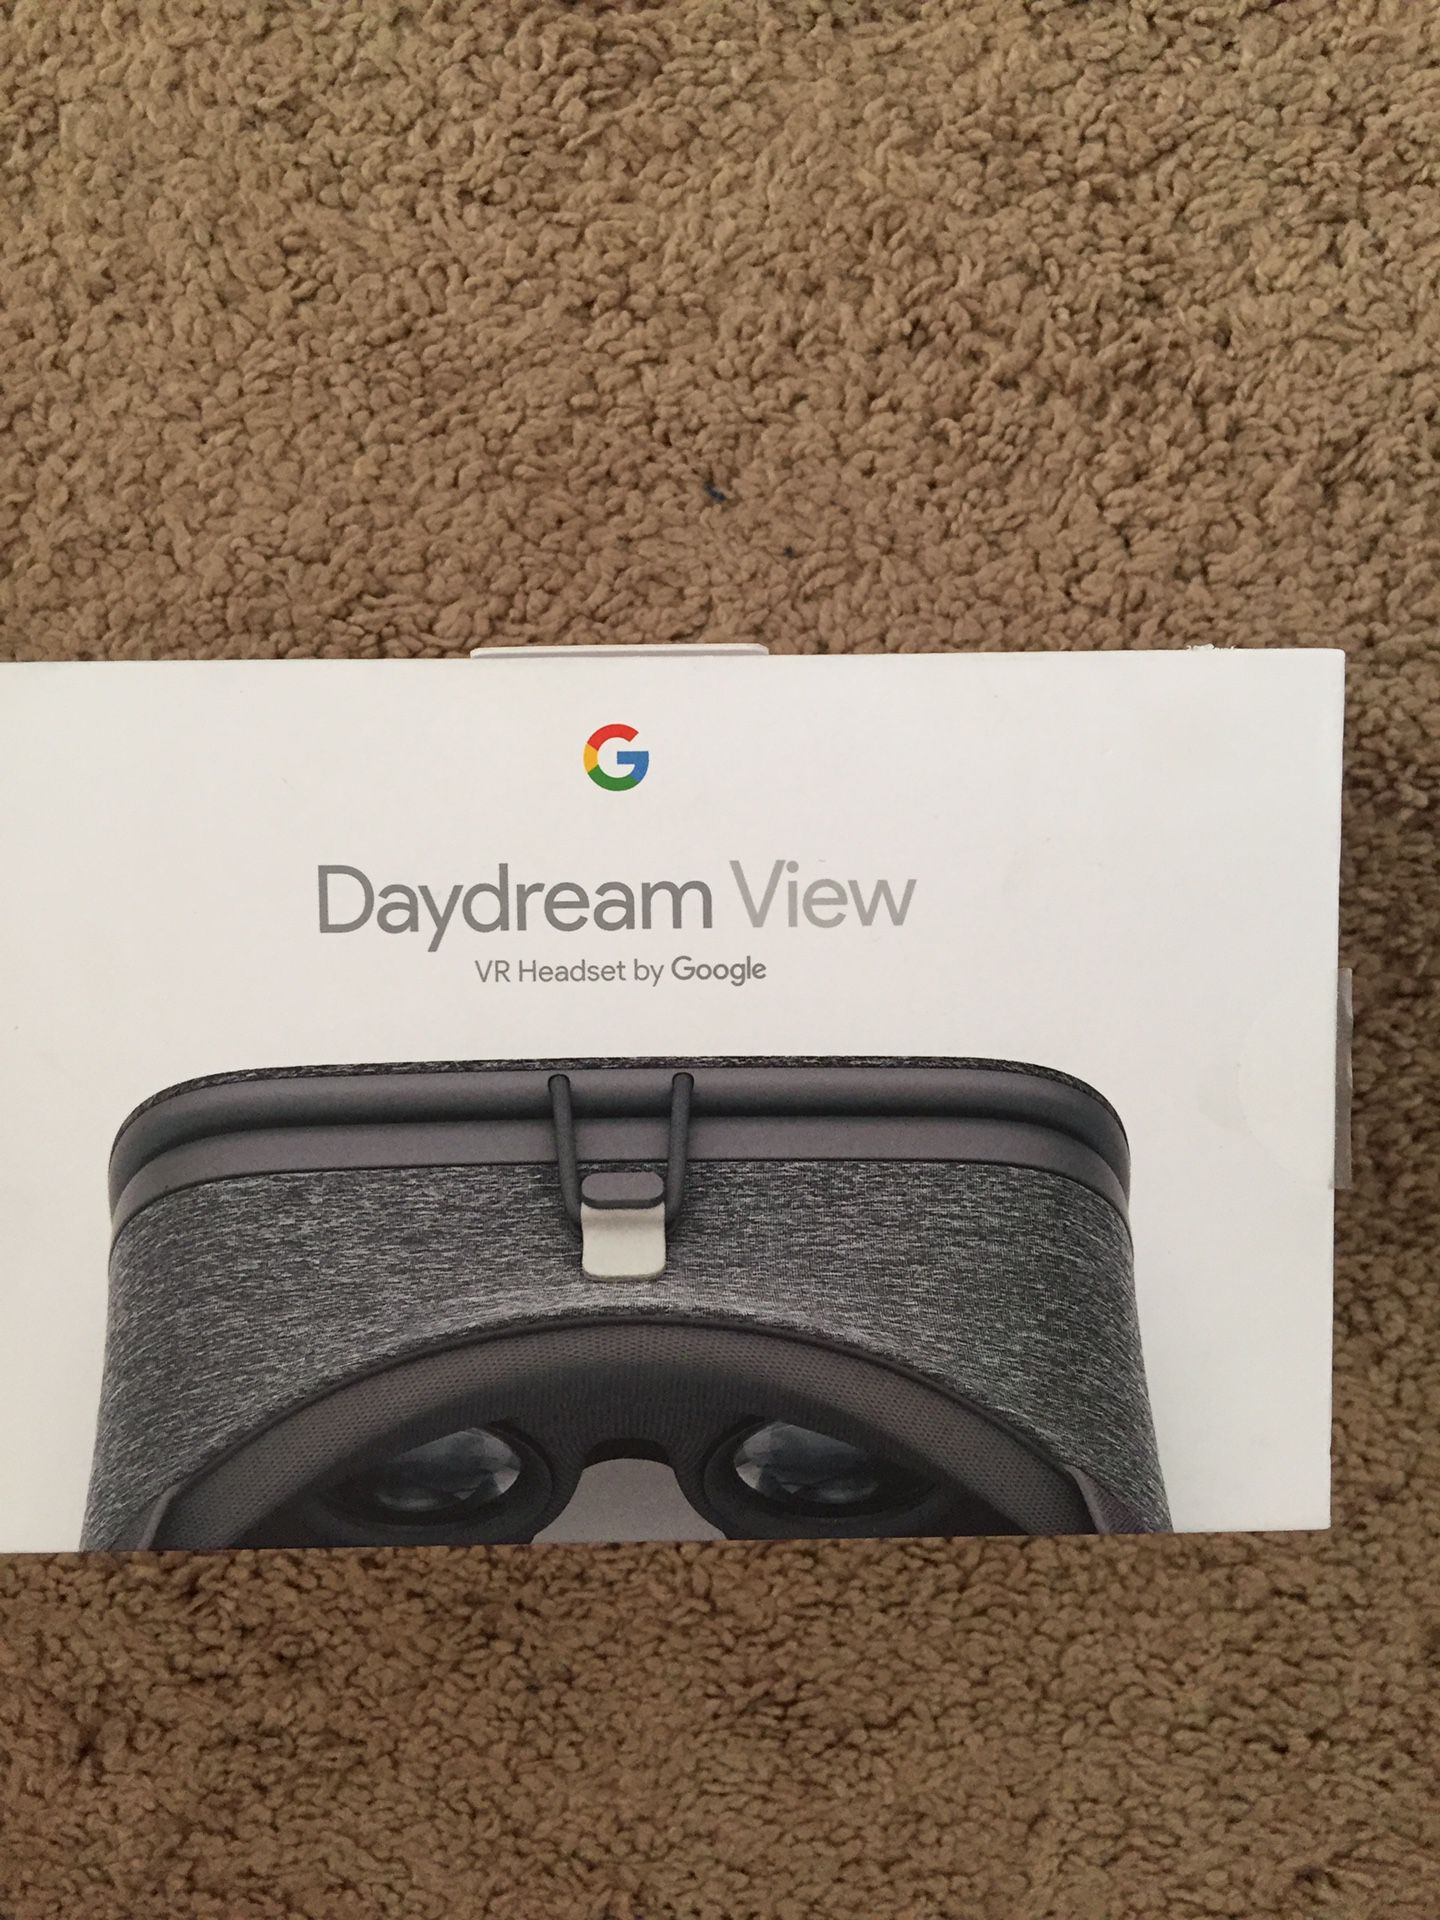 Daydream View VR Headset by Google